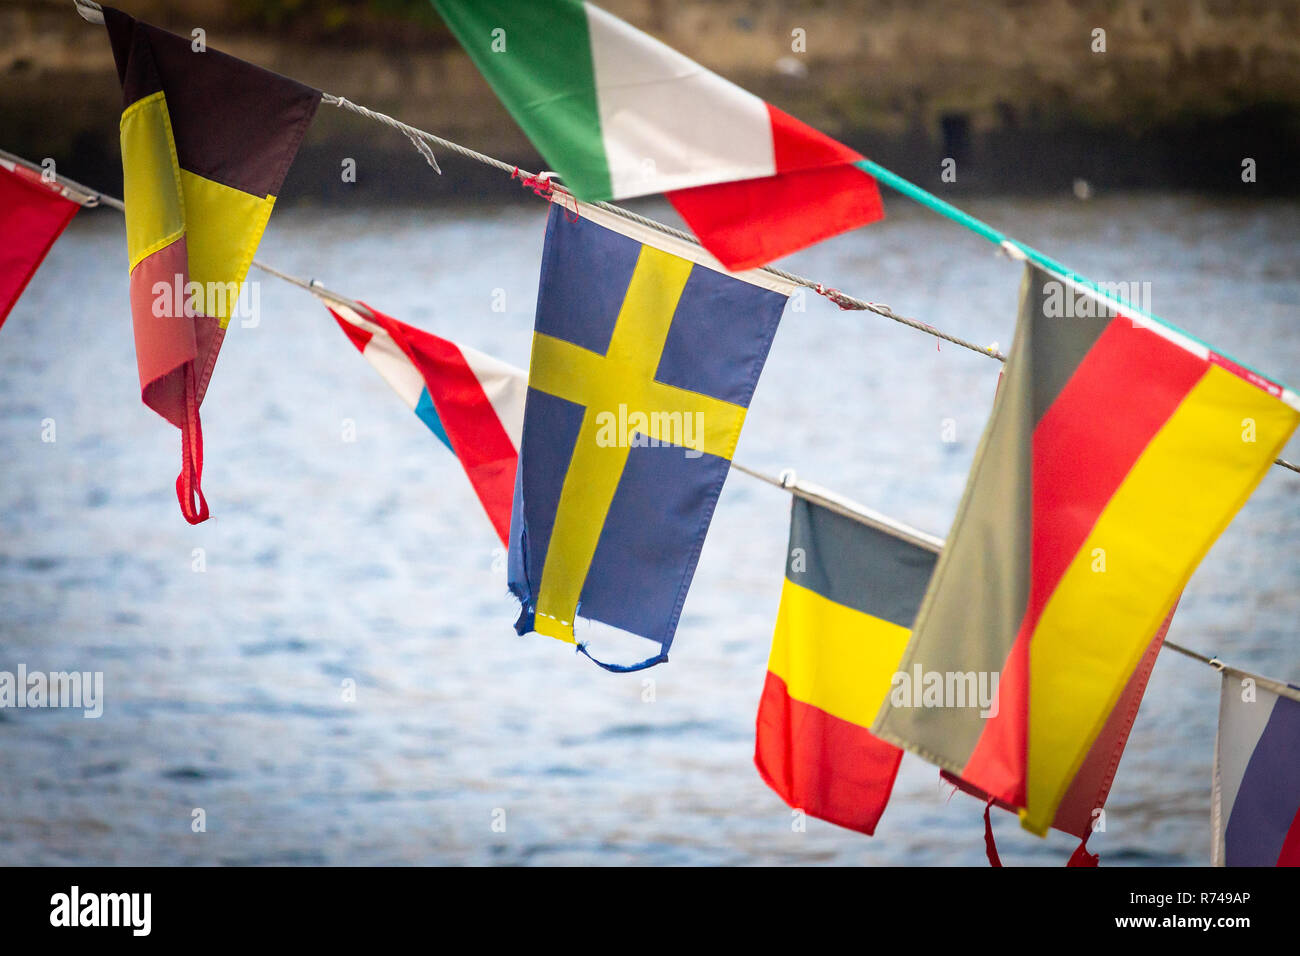 A flag of Sweden waves amidst other national flags (Belgium, Germany, Italy), against a river in the background. Stock Photo